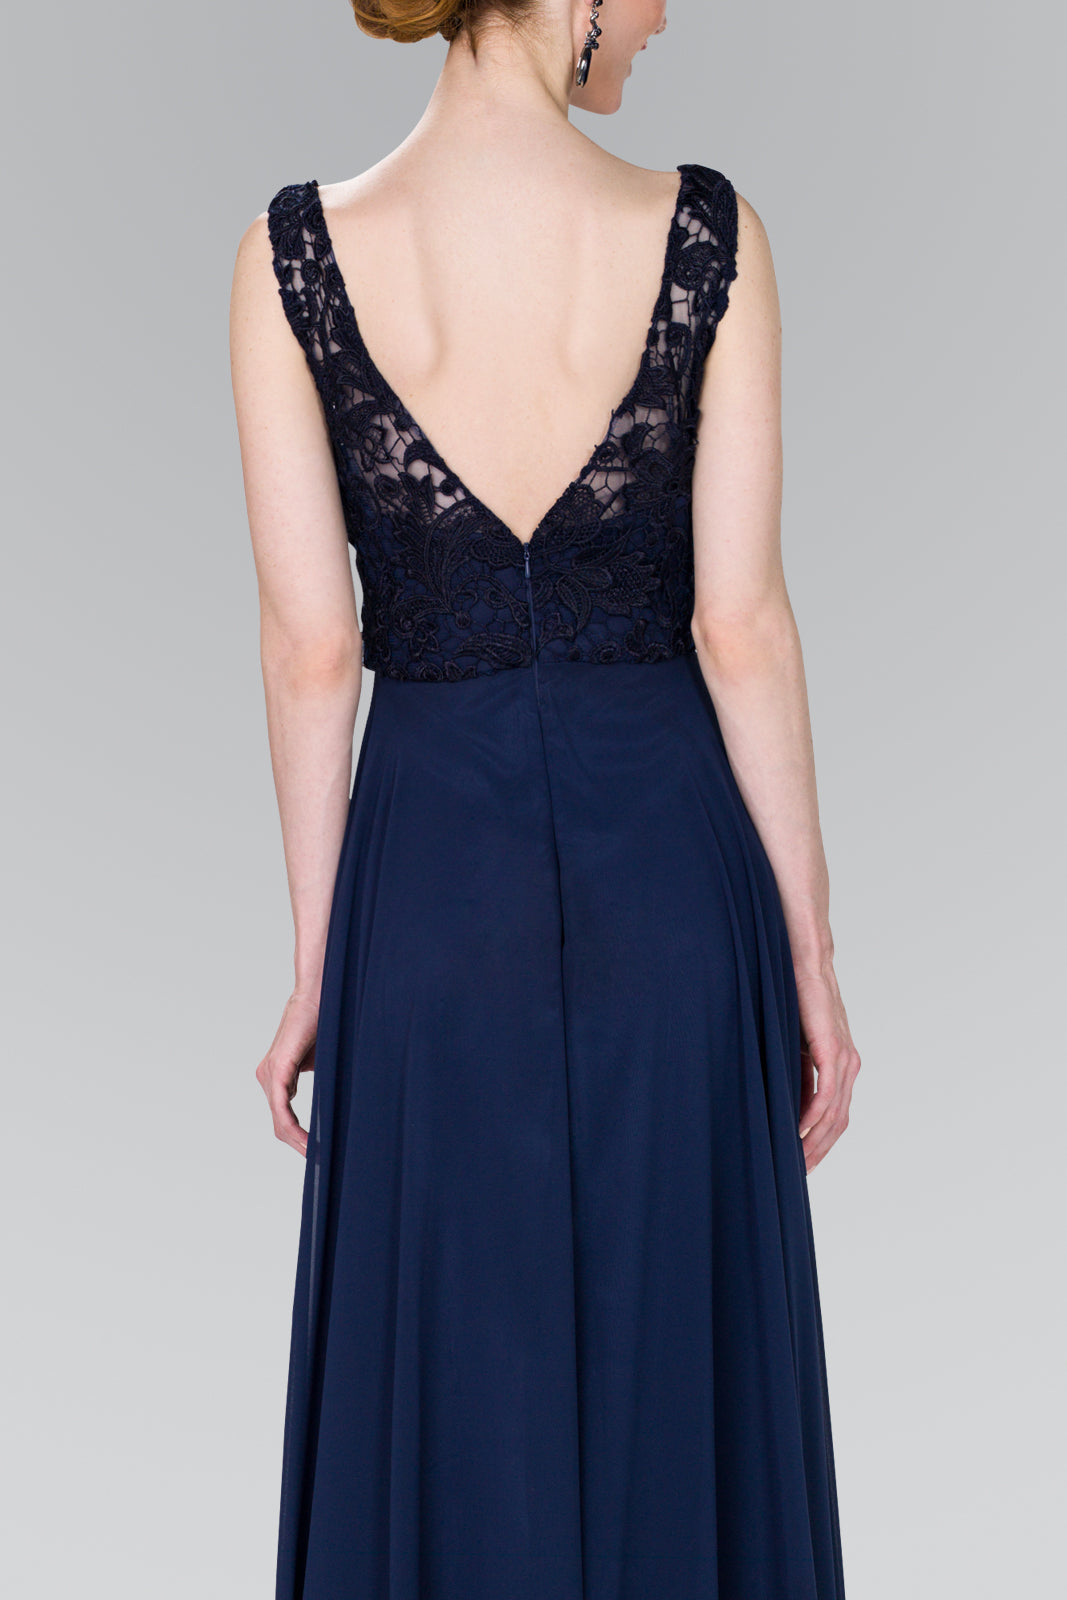 Lace Top Chiffon Long Dress Accented by Jewels on the Waist GLGL2420-PROM-smcfashion.com